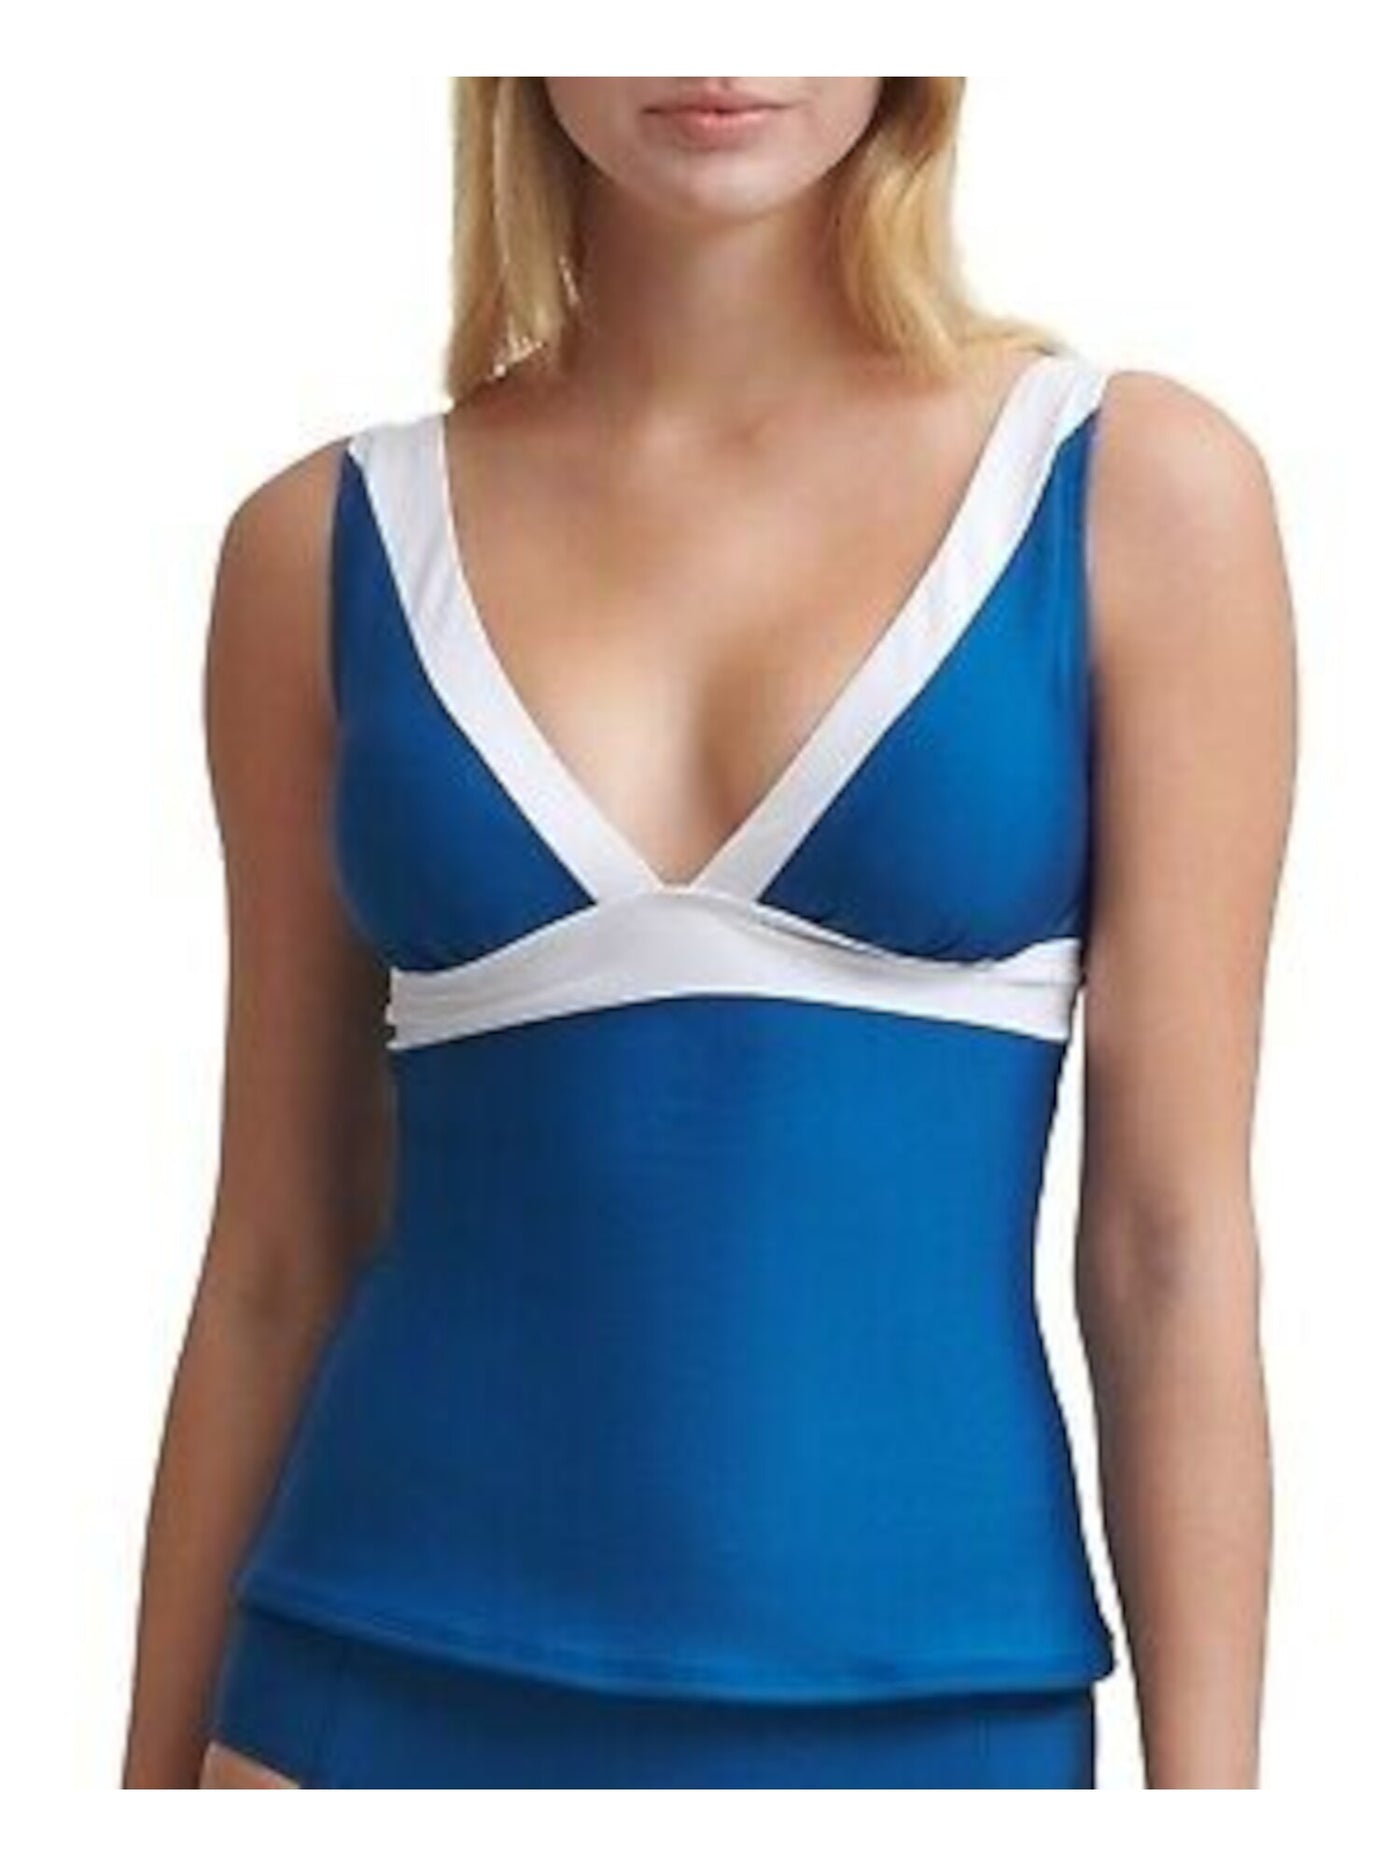 DKNY Women's Blue Color Block Removable Soft Cups Deep V Neck Adjustable Tankini Swimsuit Top S